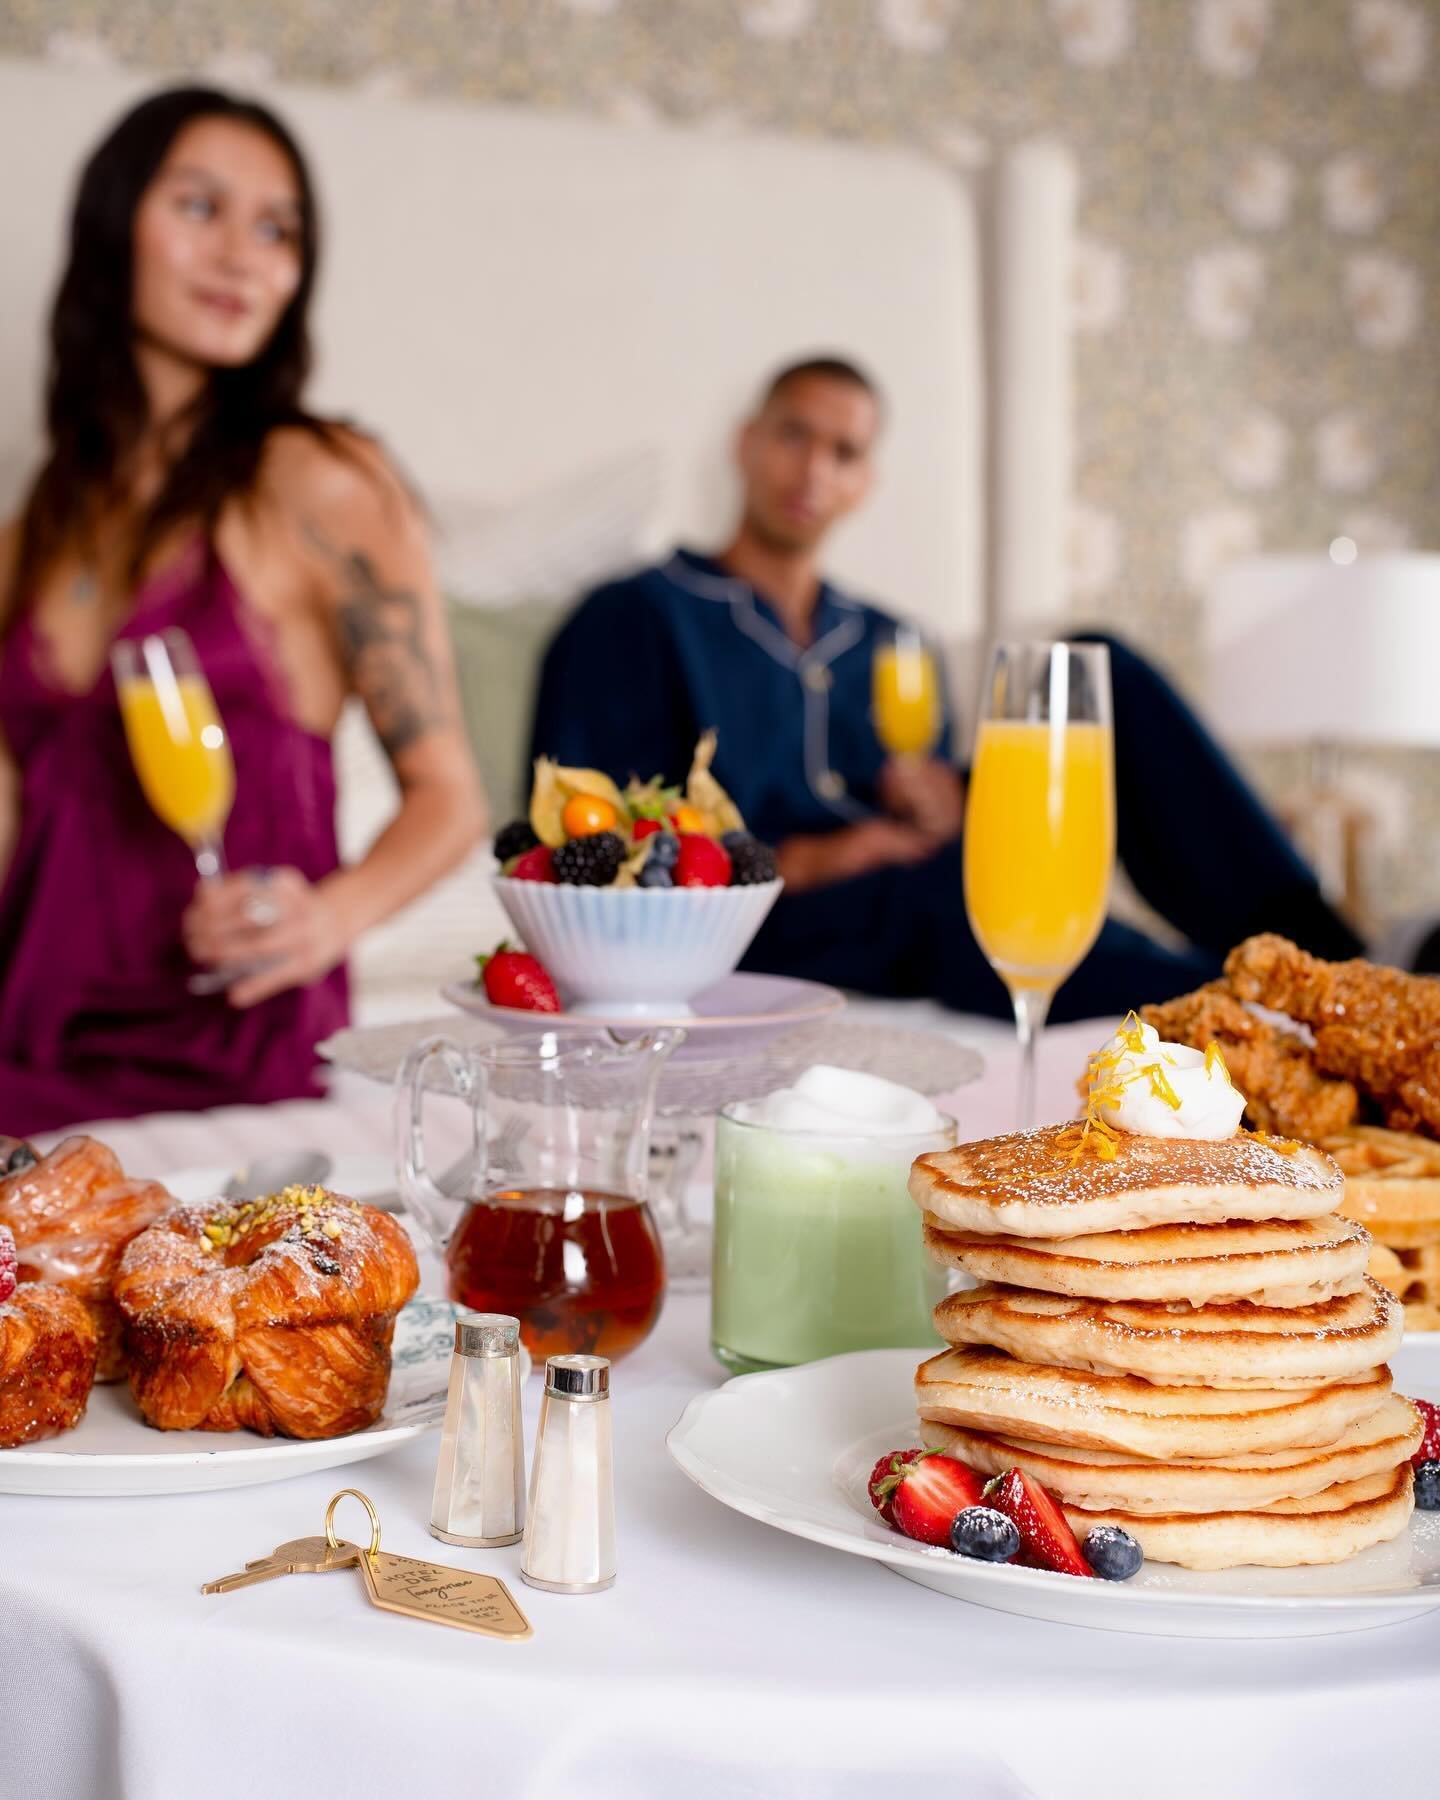 Welcome to Hotel de Tangerine, a concept hotel with the well-traveled gourmand in mind. The new room service menu brunch favorites are matcha lattes, smoked fried chicken and waffles, the lemon-berry pancake stack, and mimosa service. 

Book your sta